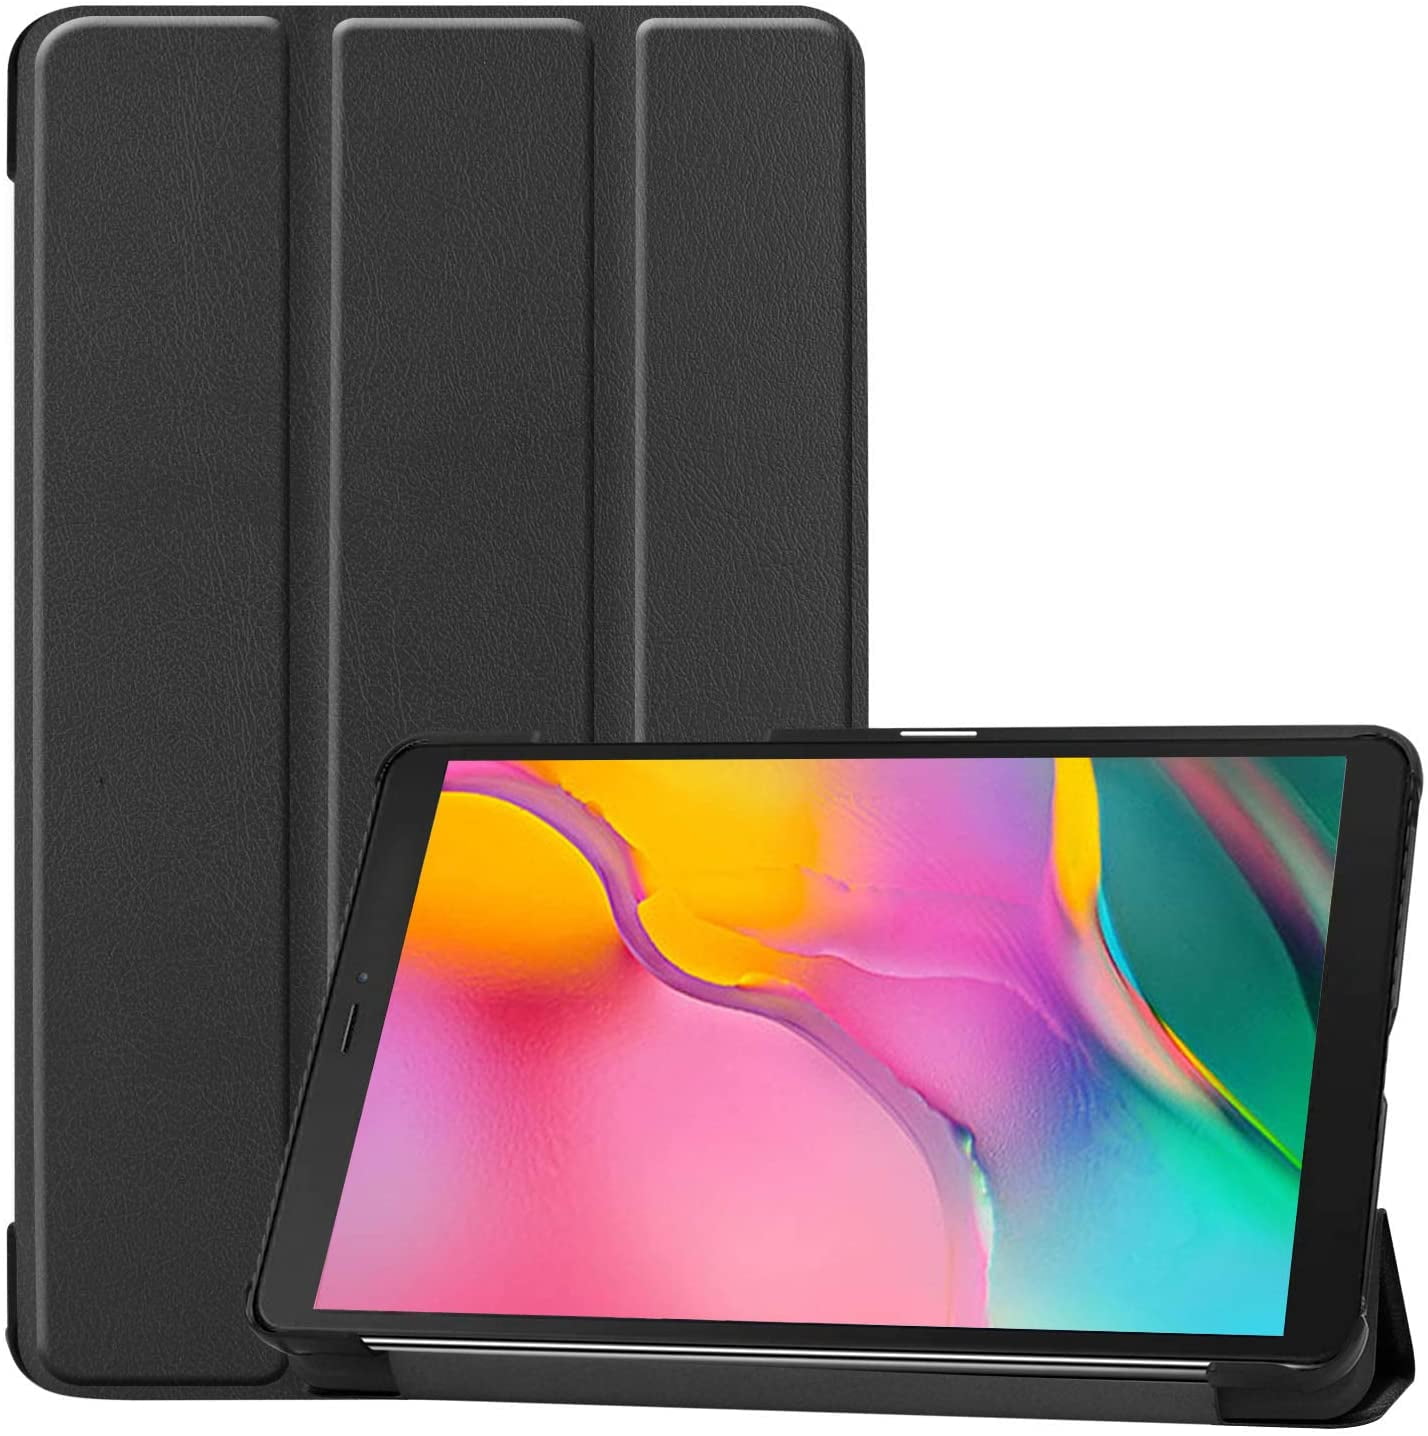 Mazepoly Samsung Galaxy Tab A 8.0 Case T290 T295, Slim Light Cover Trifold Stand Hard Shell Cover for 8.0 inch Galaxy Tab A 2019 Model SM-T290 (Wi-Fi) SM-T295 (LTE), Black -